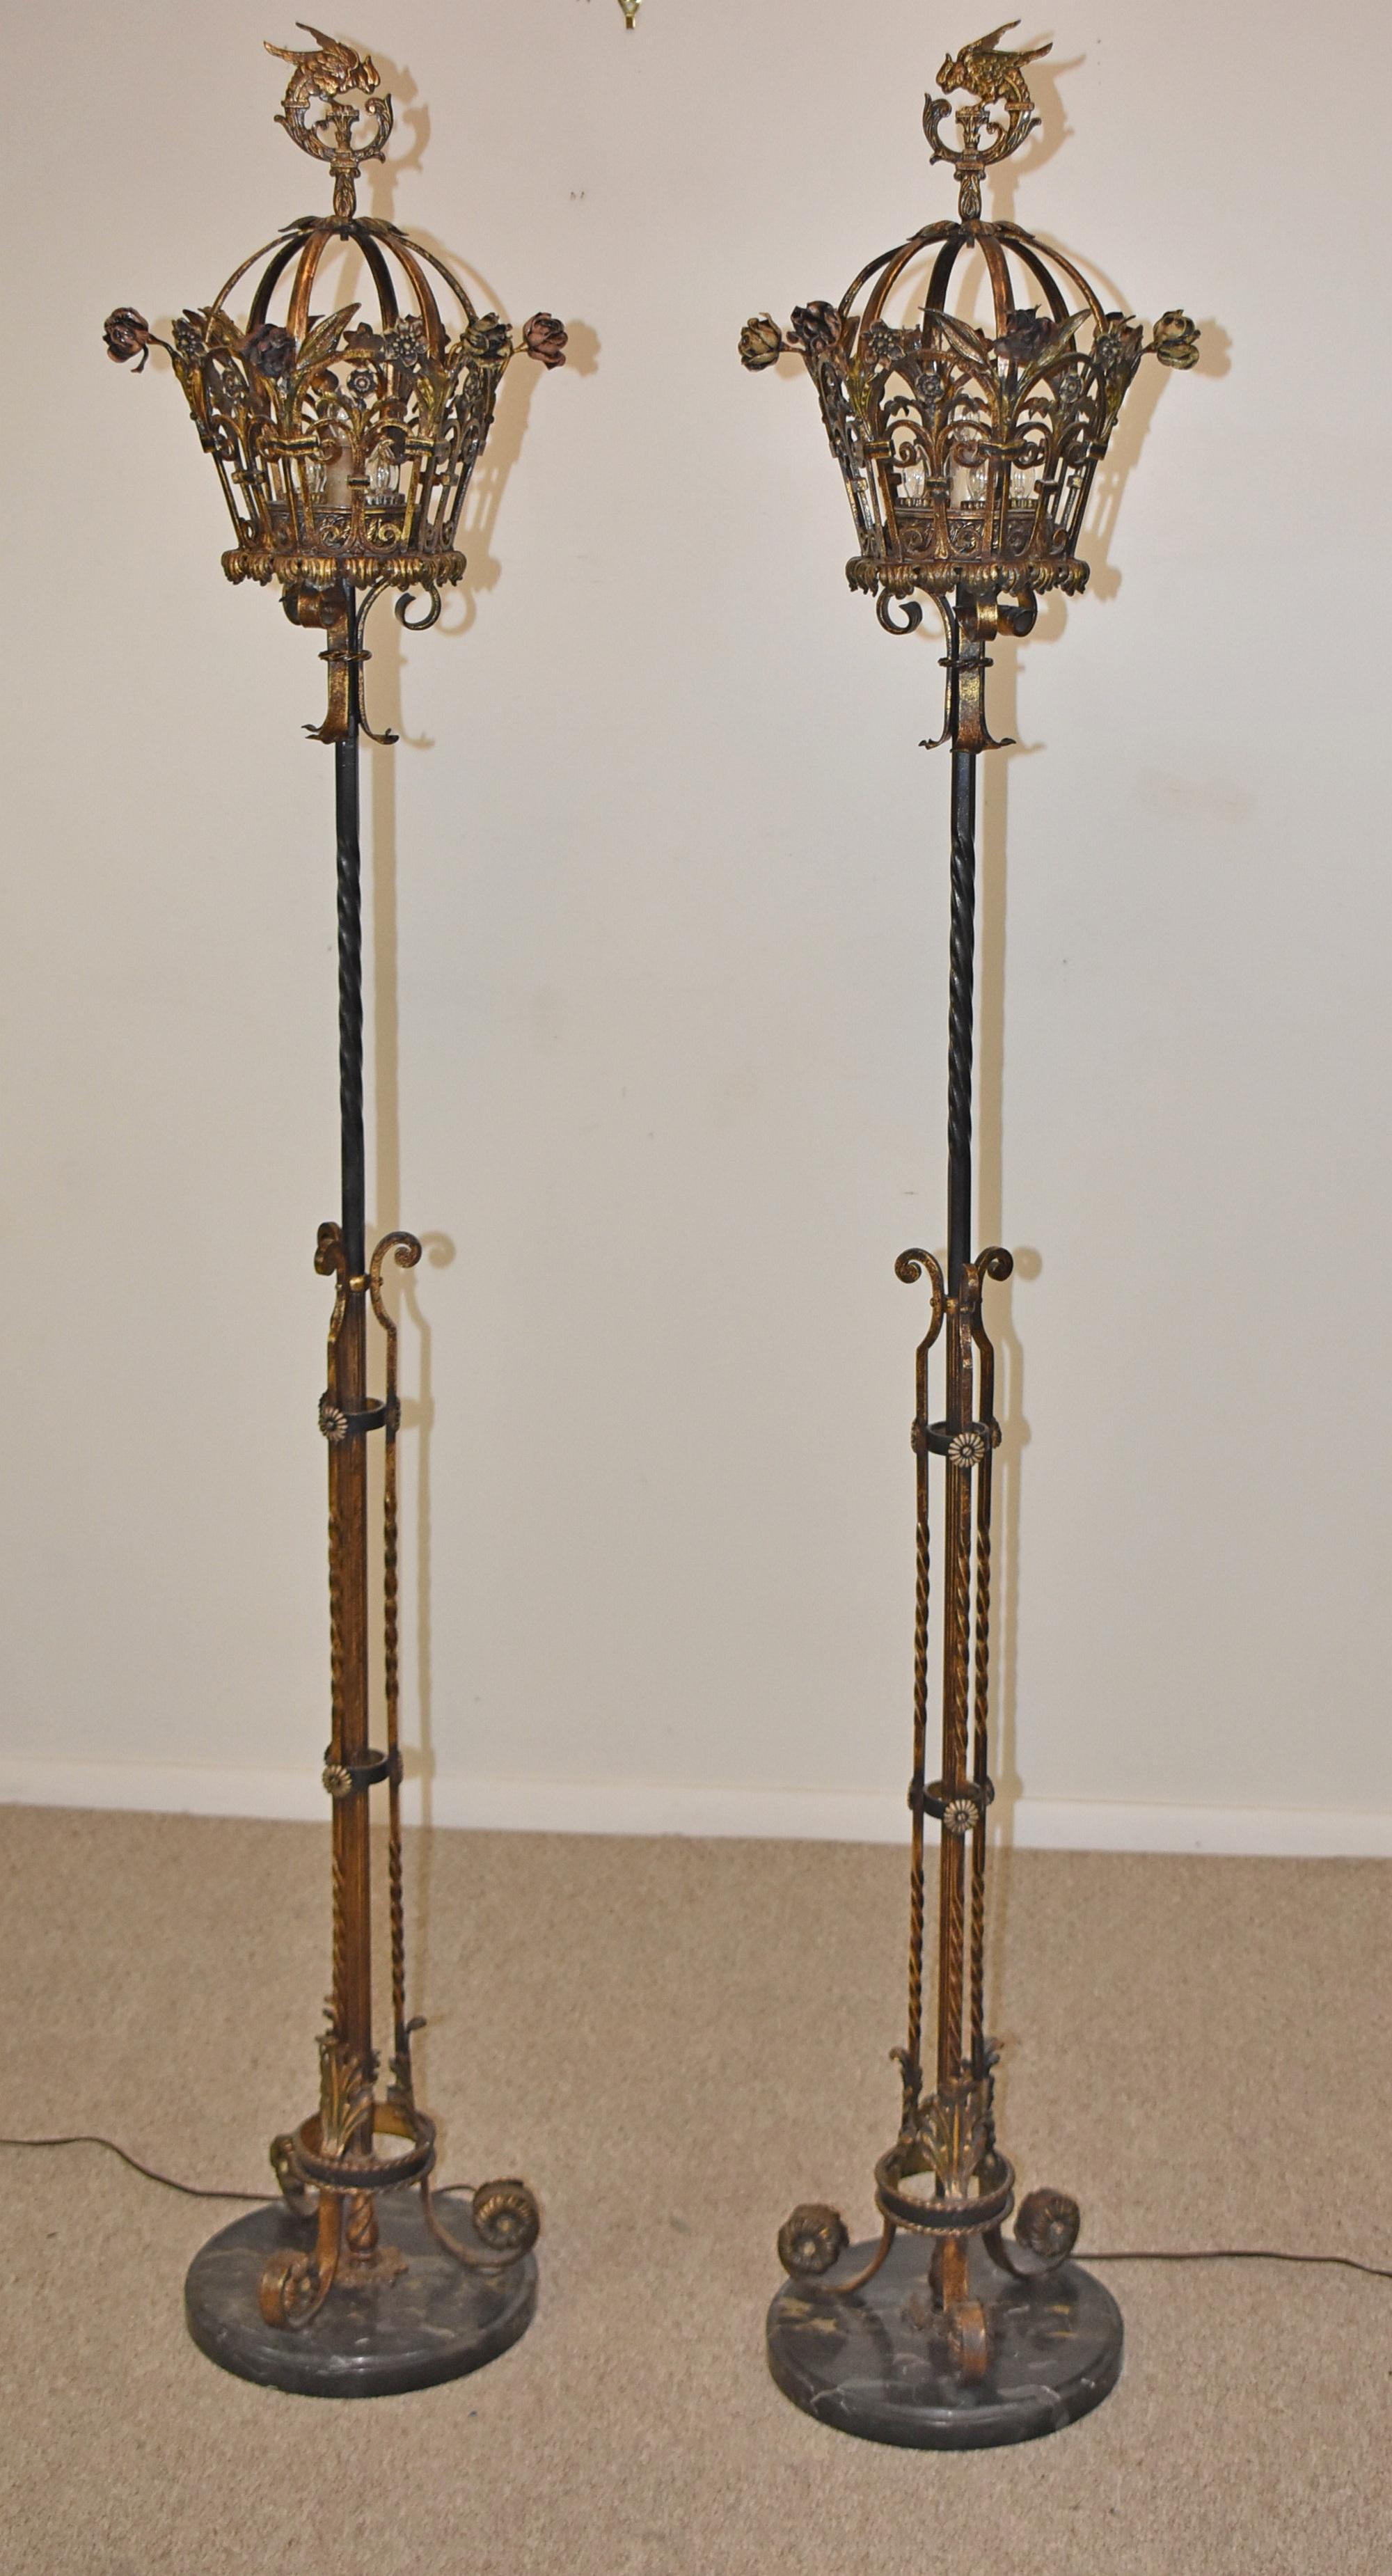 Pair of Wrought Iron 1920s Torchiers Enamel Floral Details For Sale 1